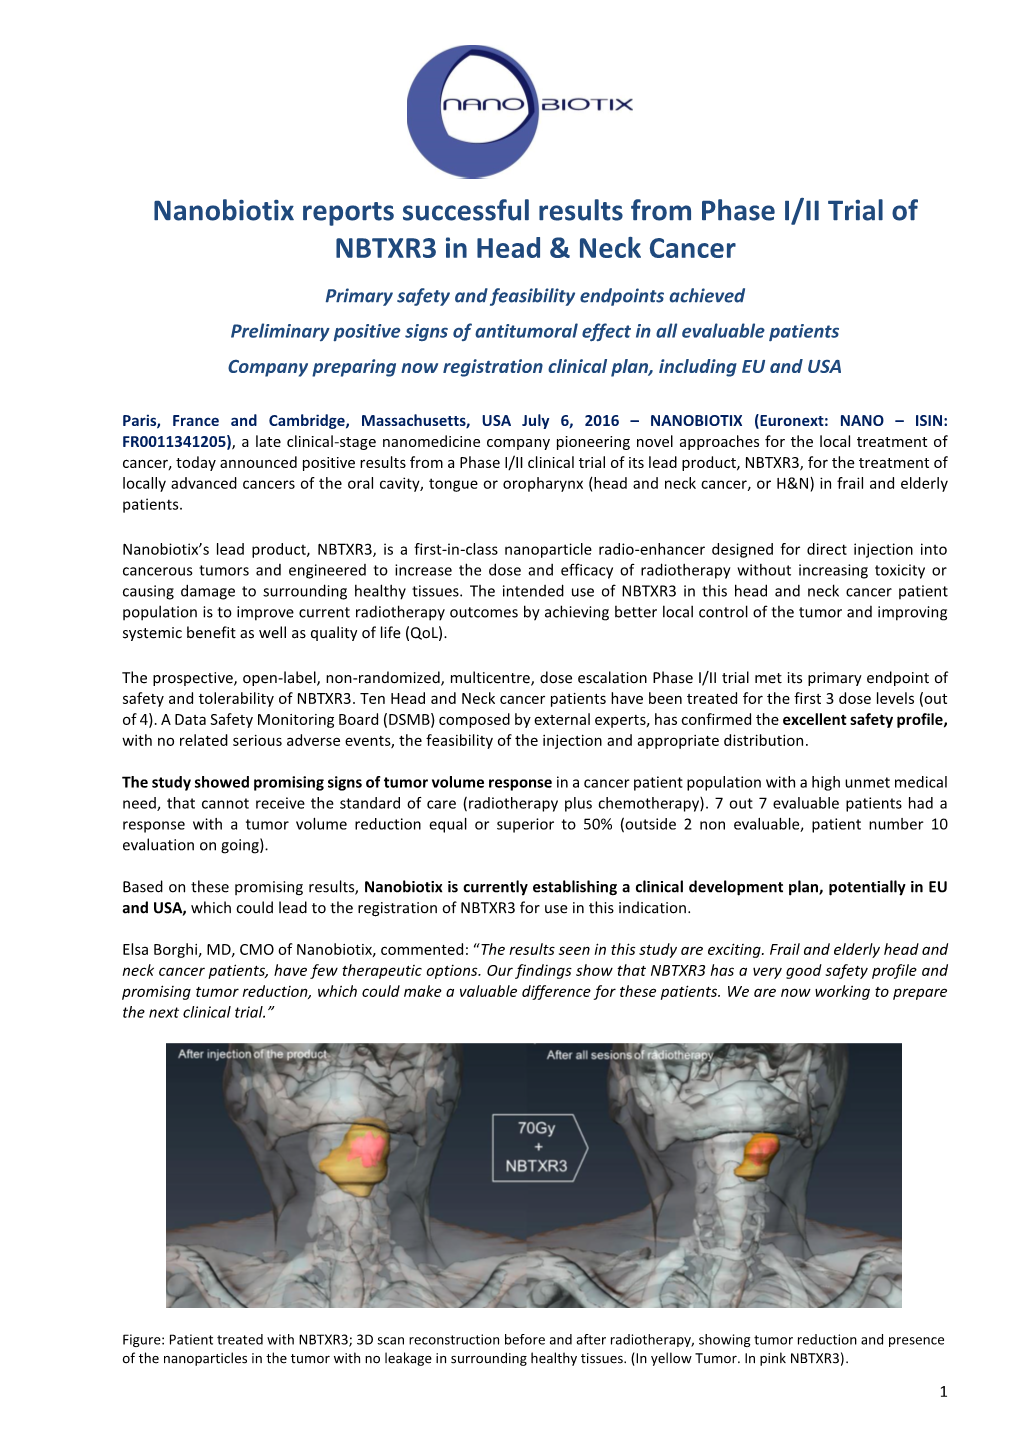 Nanobiotix Reports Successful Results from Phase I/II Trial of NBTXR3 in Head & Neck Cancer